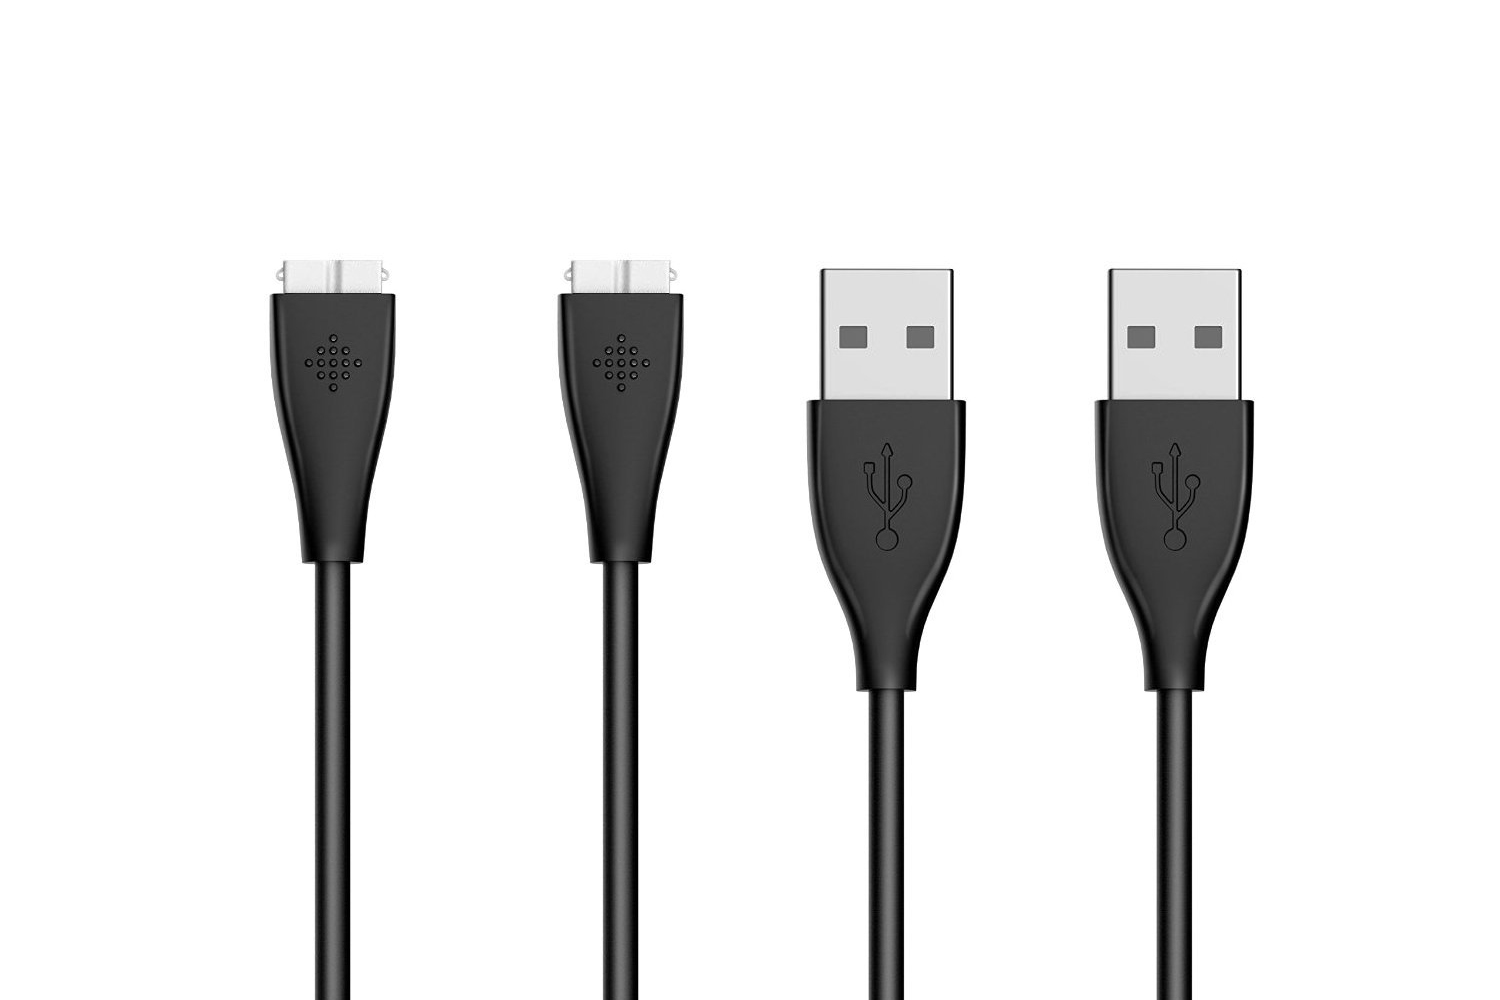 2 and 3 pack Fitbit HR charge cables for under $3 with code